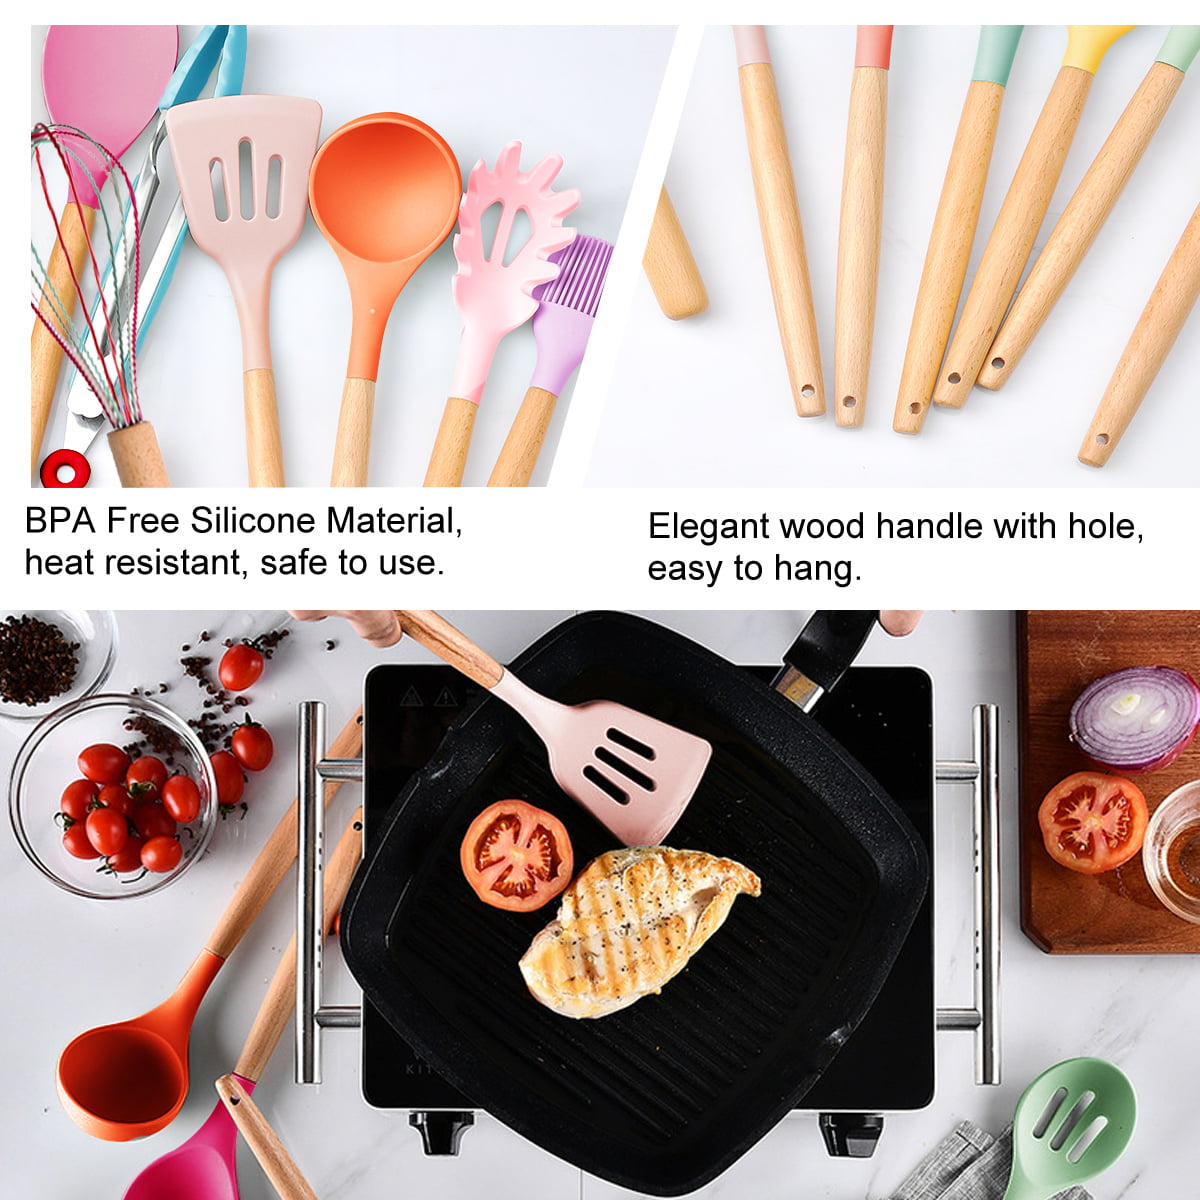 Keidason Kitchen Cooking Utensils Set, 13 Piece Wooden Handle Silicone Cookware Set with stand,nonstick Heat Resistant Silico